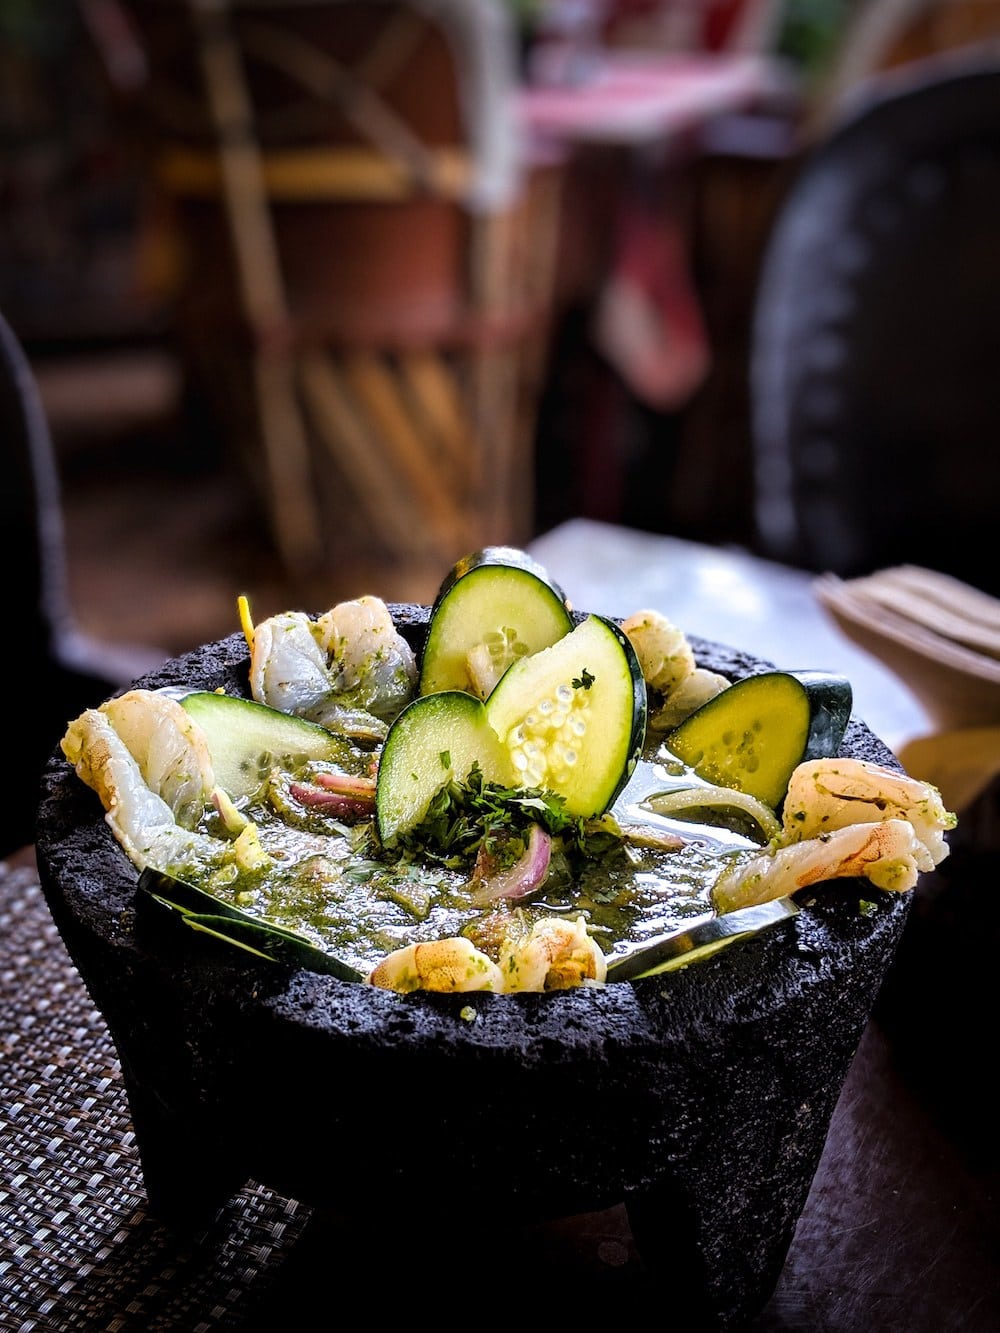 Molcajete is a dish that is served on a mortar